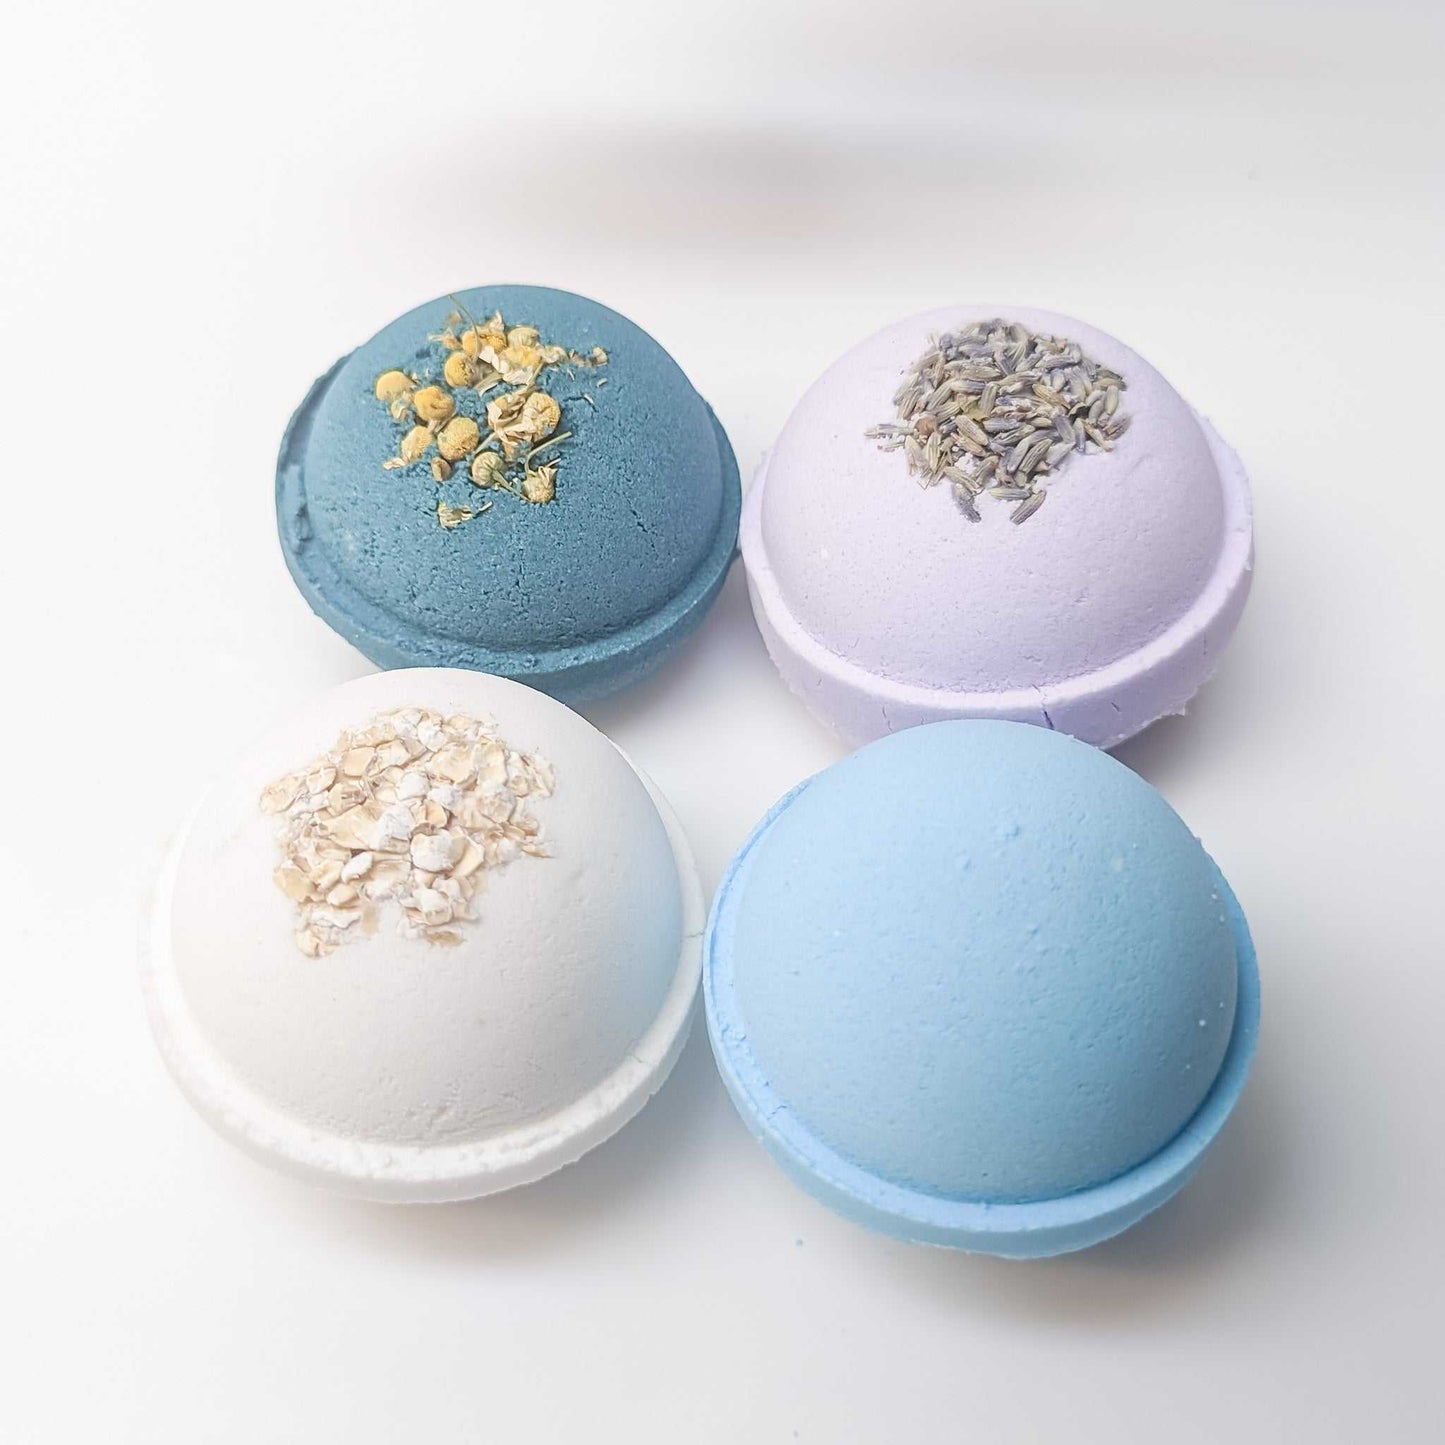 Indulge in a spa-like experience with our Lavender Bath Bomb | CG Pure Wash